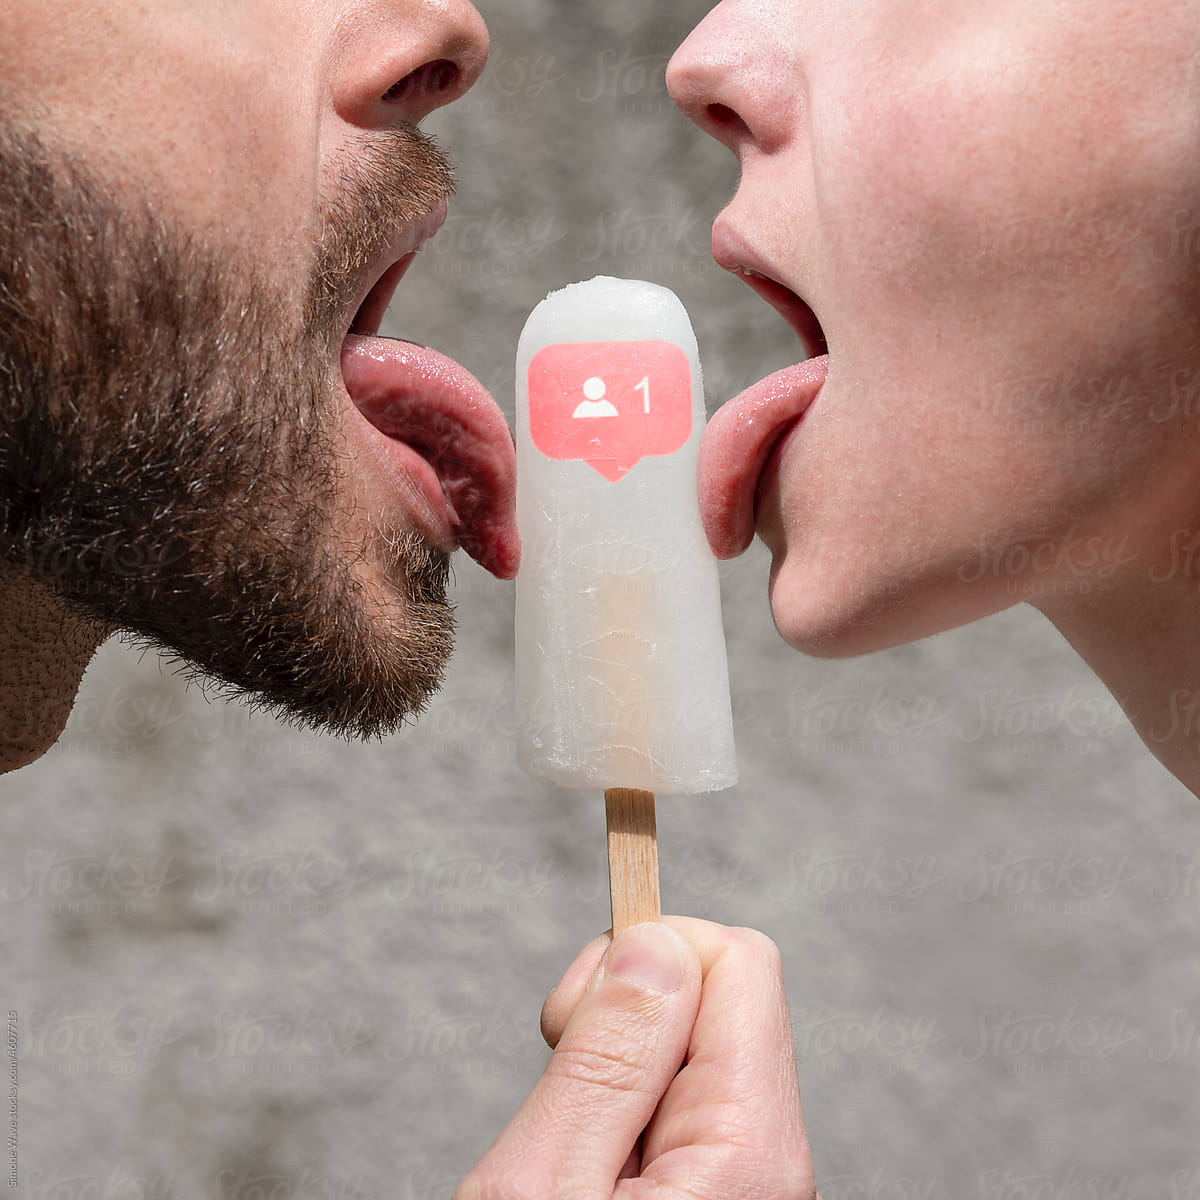 Woman and man lick ice pop with followers icon